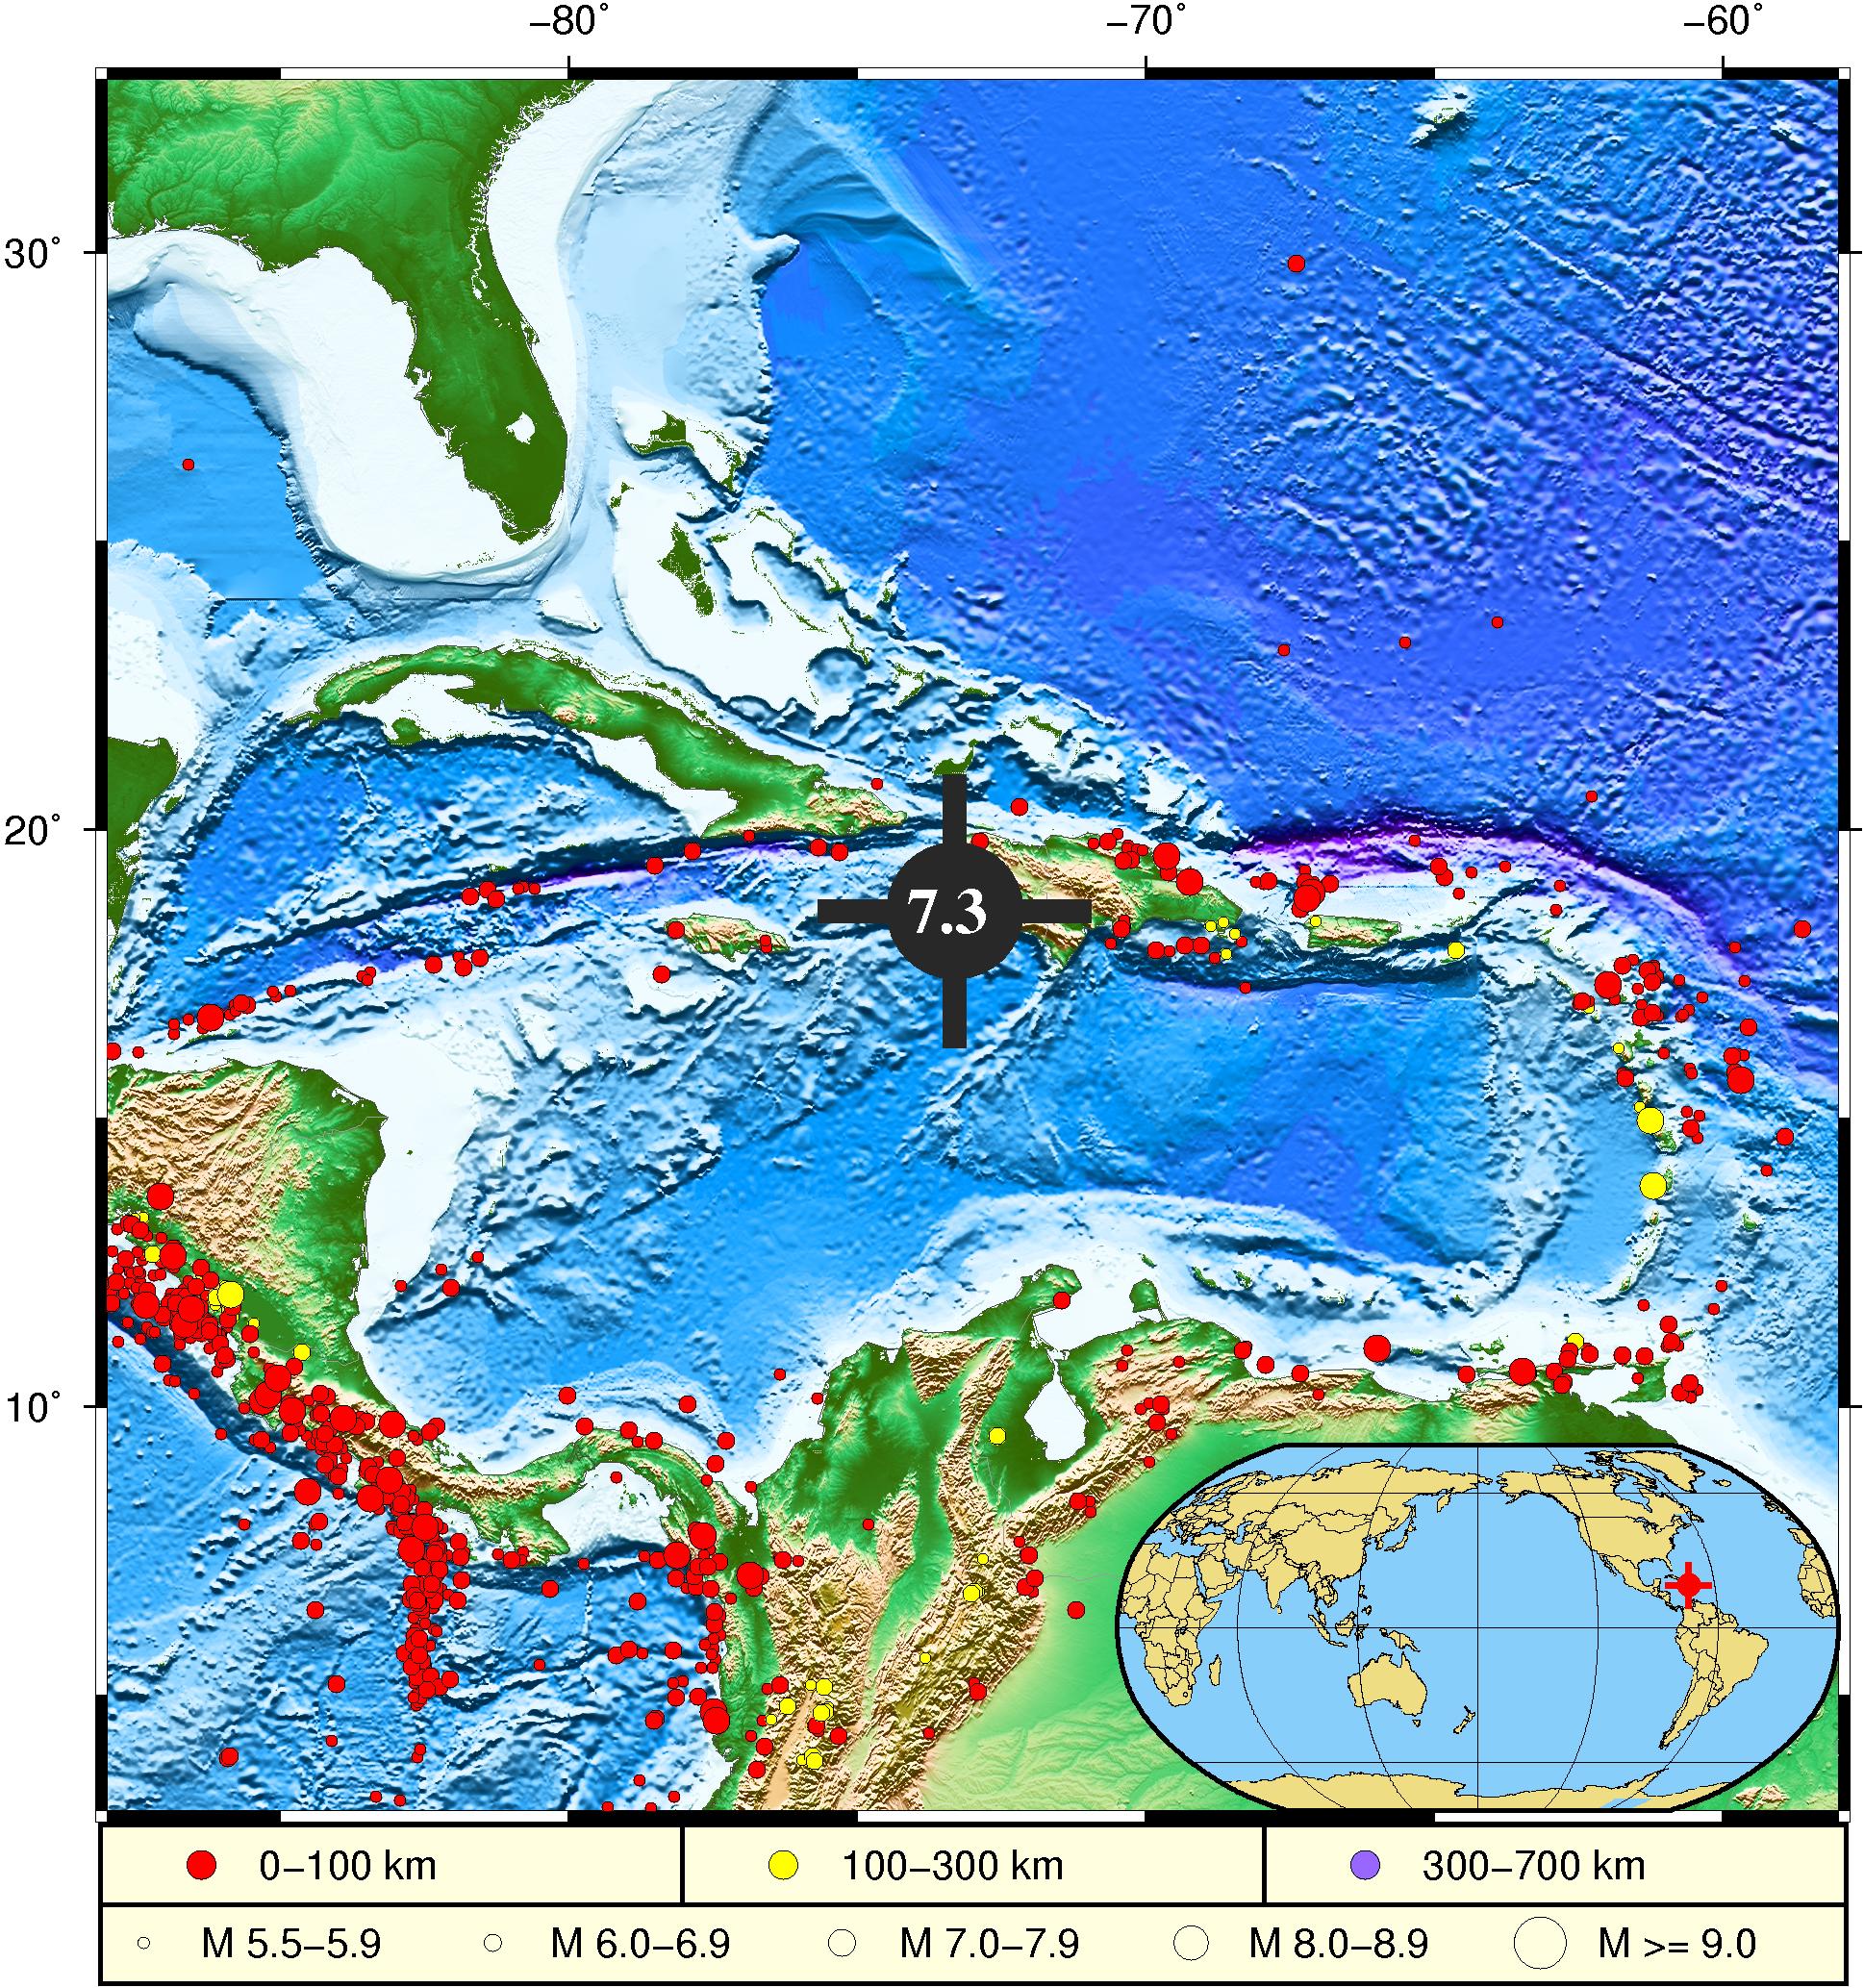 Tsunami Warning Center, Ministry of Natural Resources: A 7.3-magnitude earthquake in Haiti could trigger a local tsunami that would not affect others